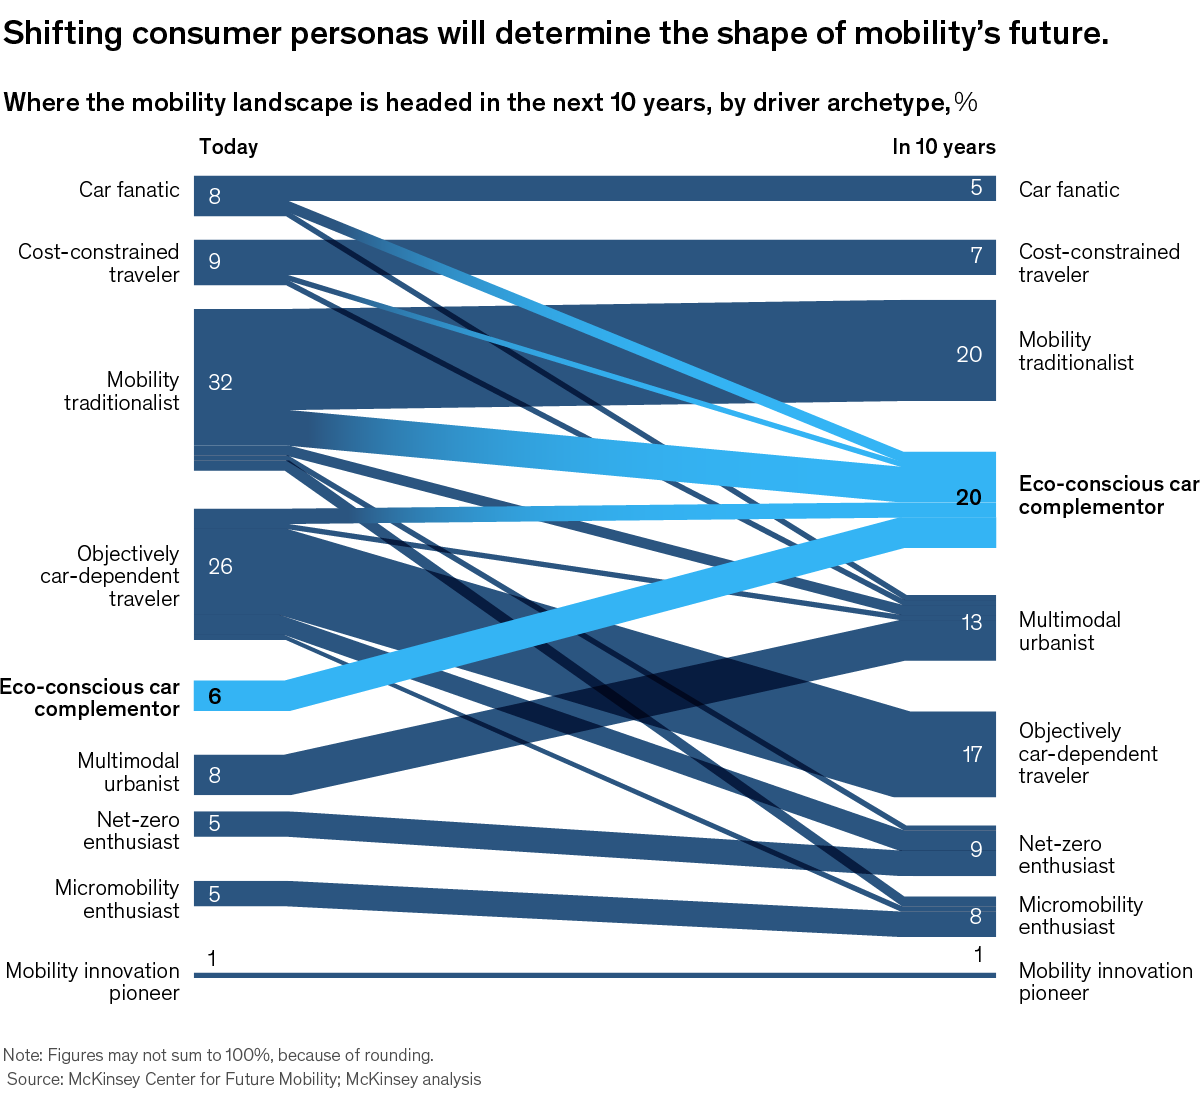 Chart showing where the mobility landscape is headed in the next 10 years, by driver archetype.